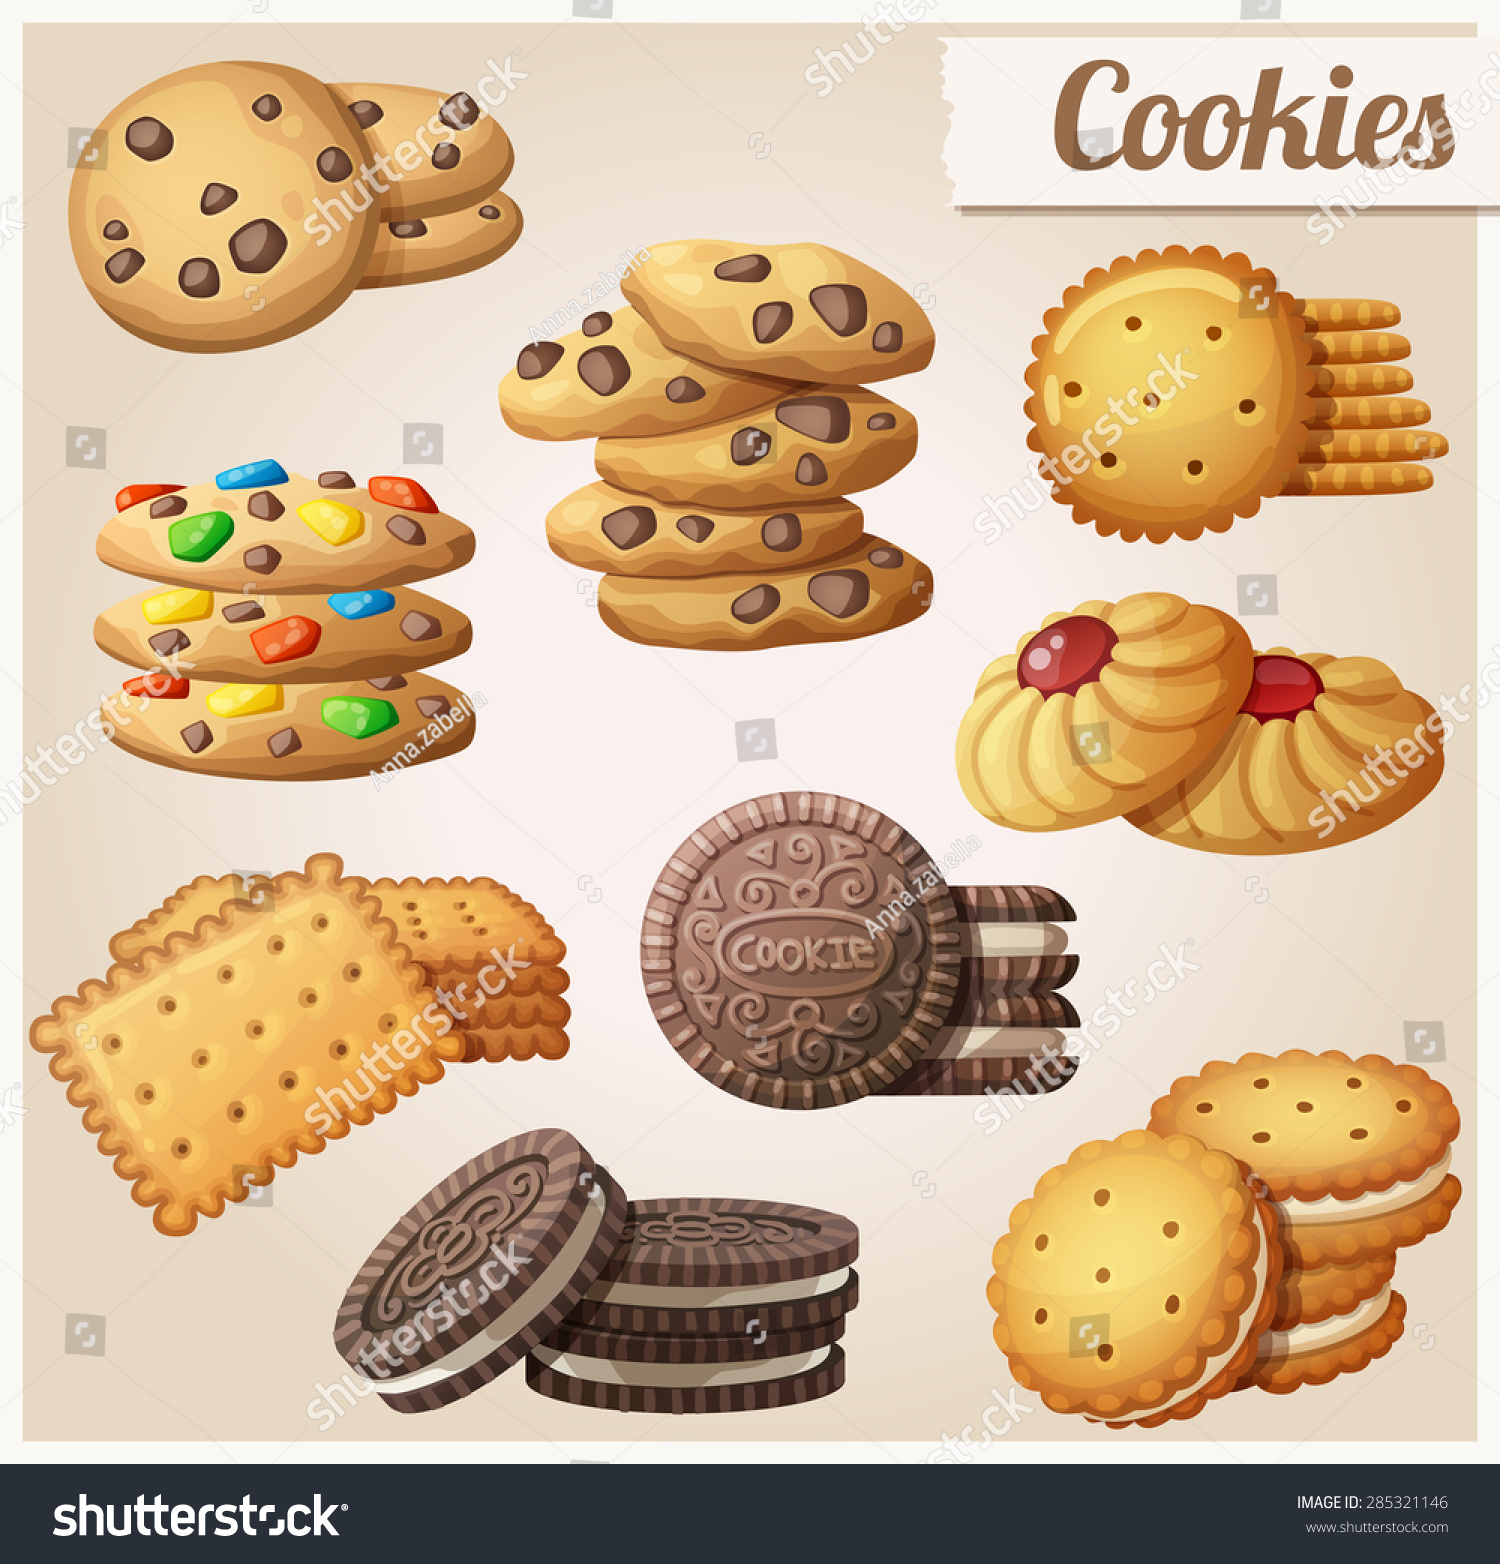 SVG of Cookies. Set of cartoon vector food icons.  svg